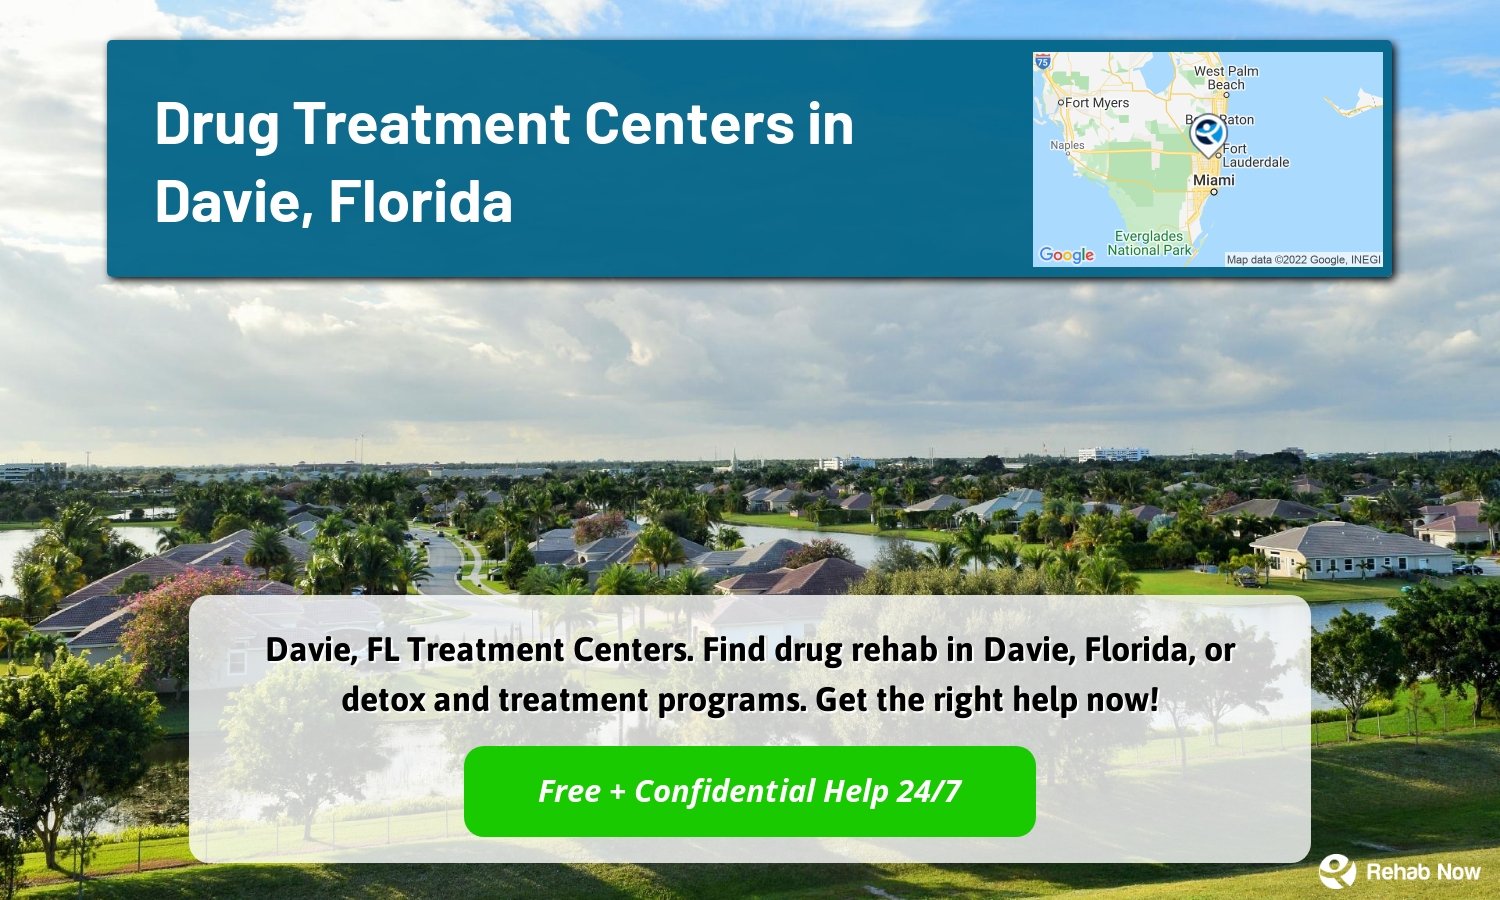 Davie, FL Treatment Centers. Find drug rehab in Davie, Florida, or detox and treatment programs. Get the right help now!